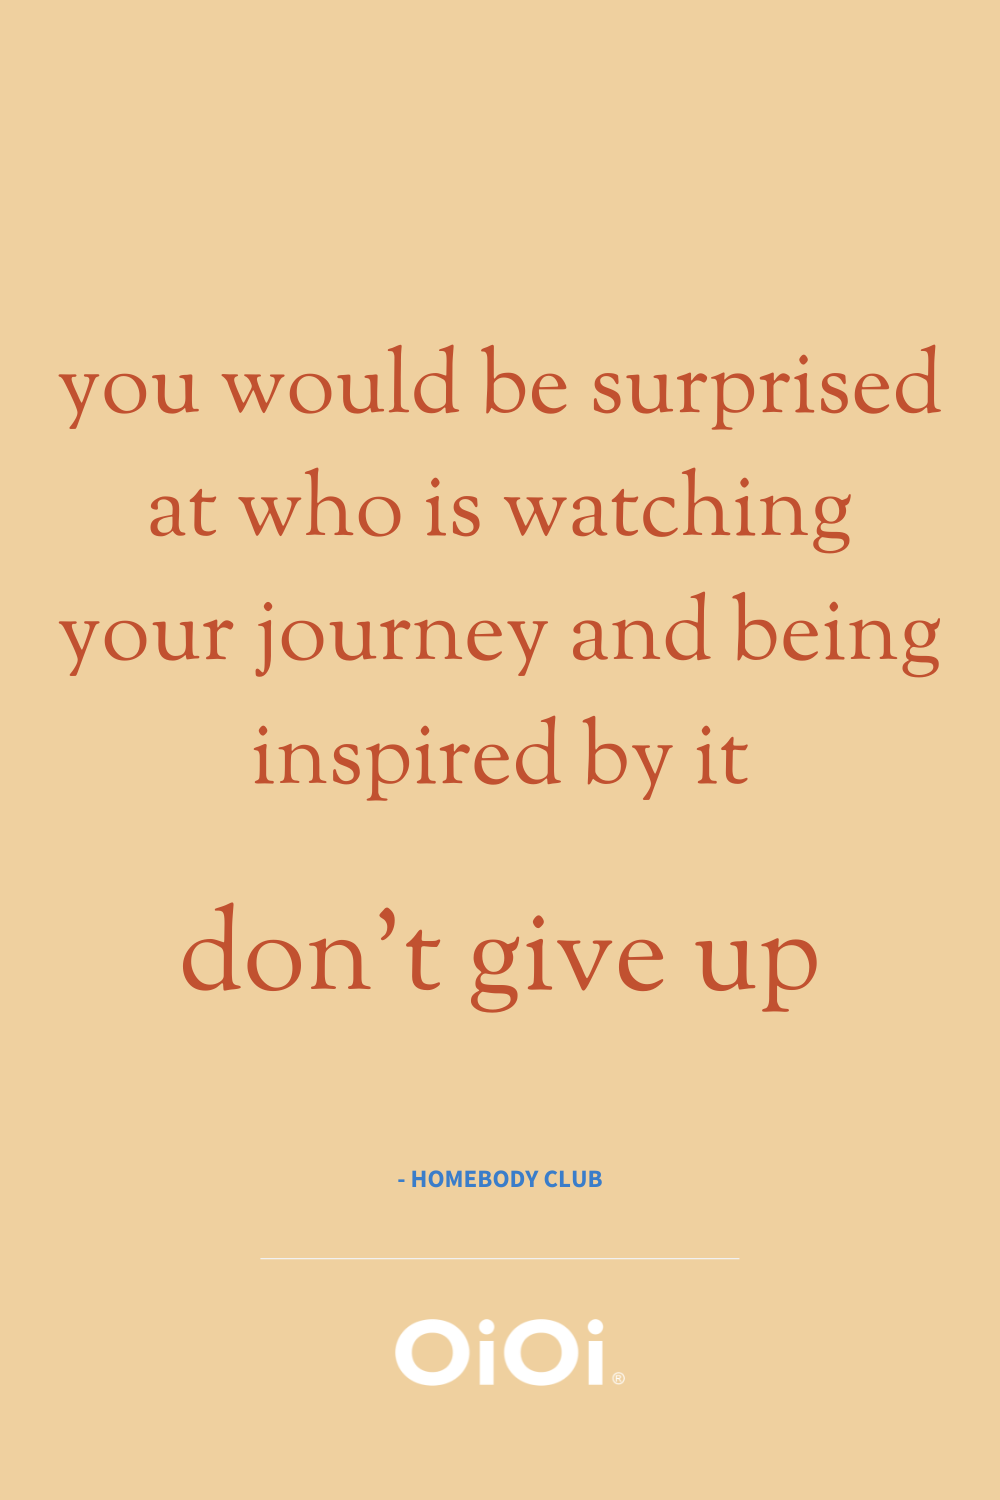 motherhood quote: you would be surprised at who is watching your journey and being inspired by it - don't give up!